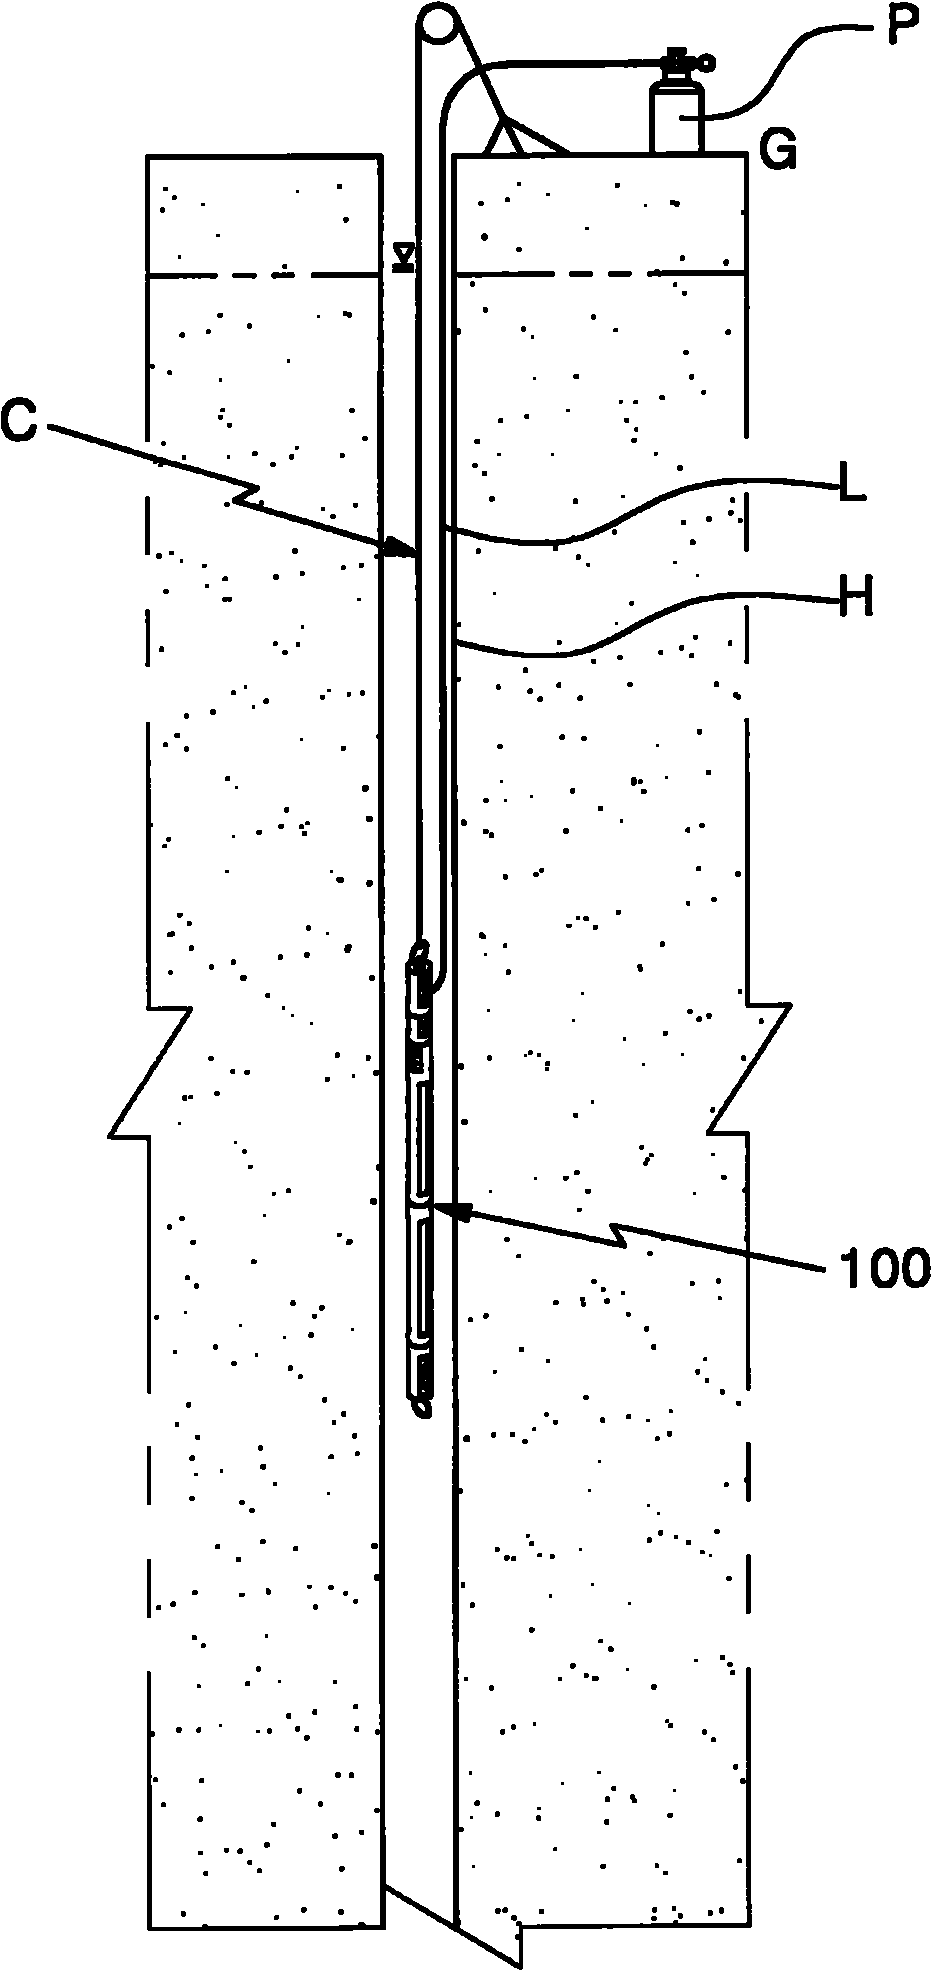 Apparatus and method for groundwater sampling using hydraulic couplers